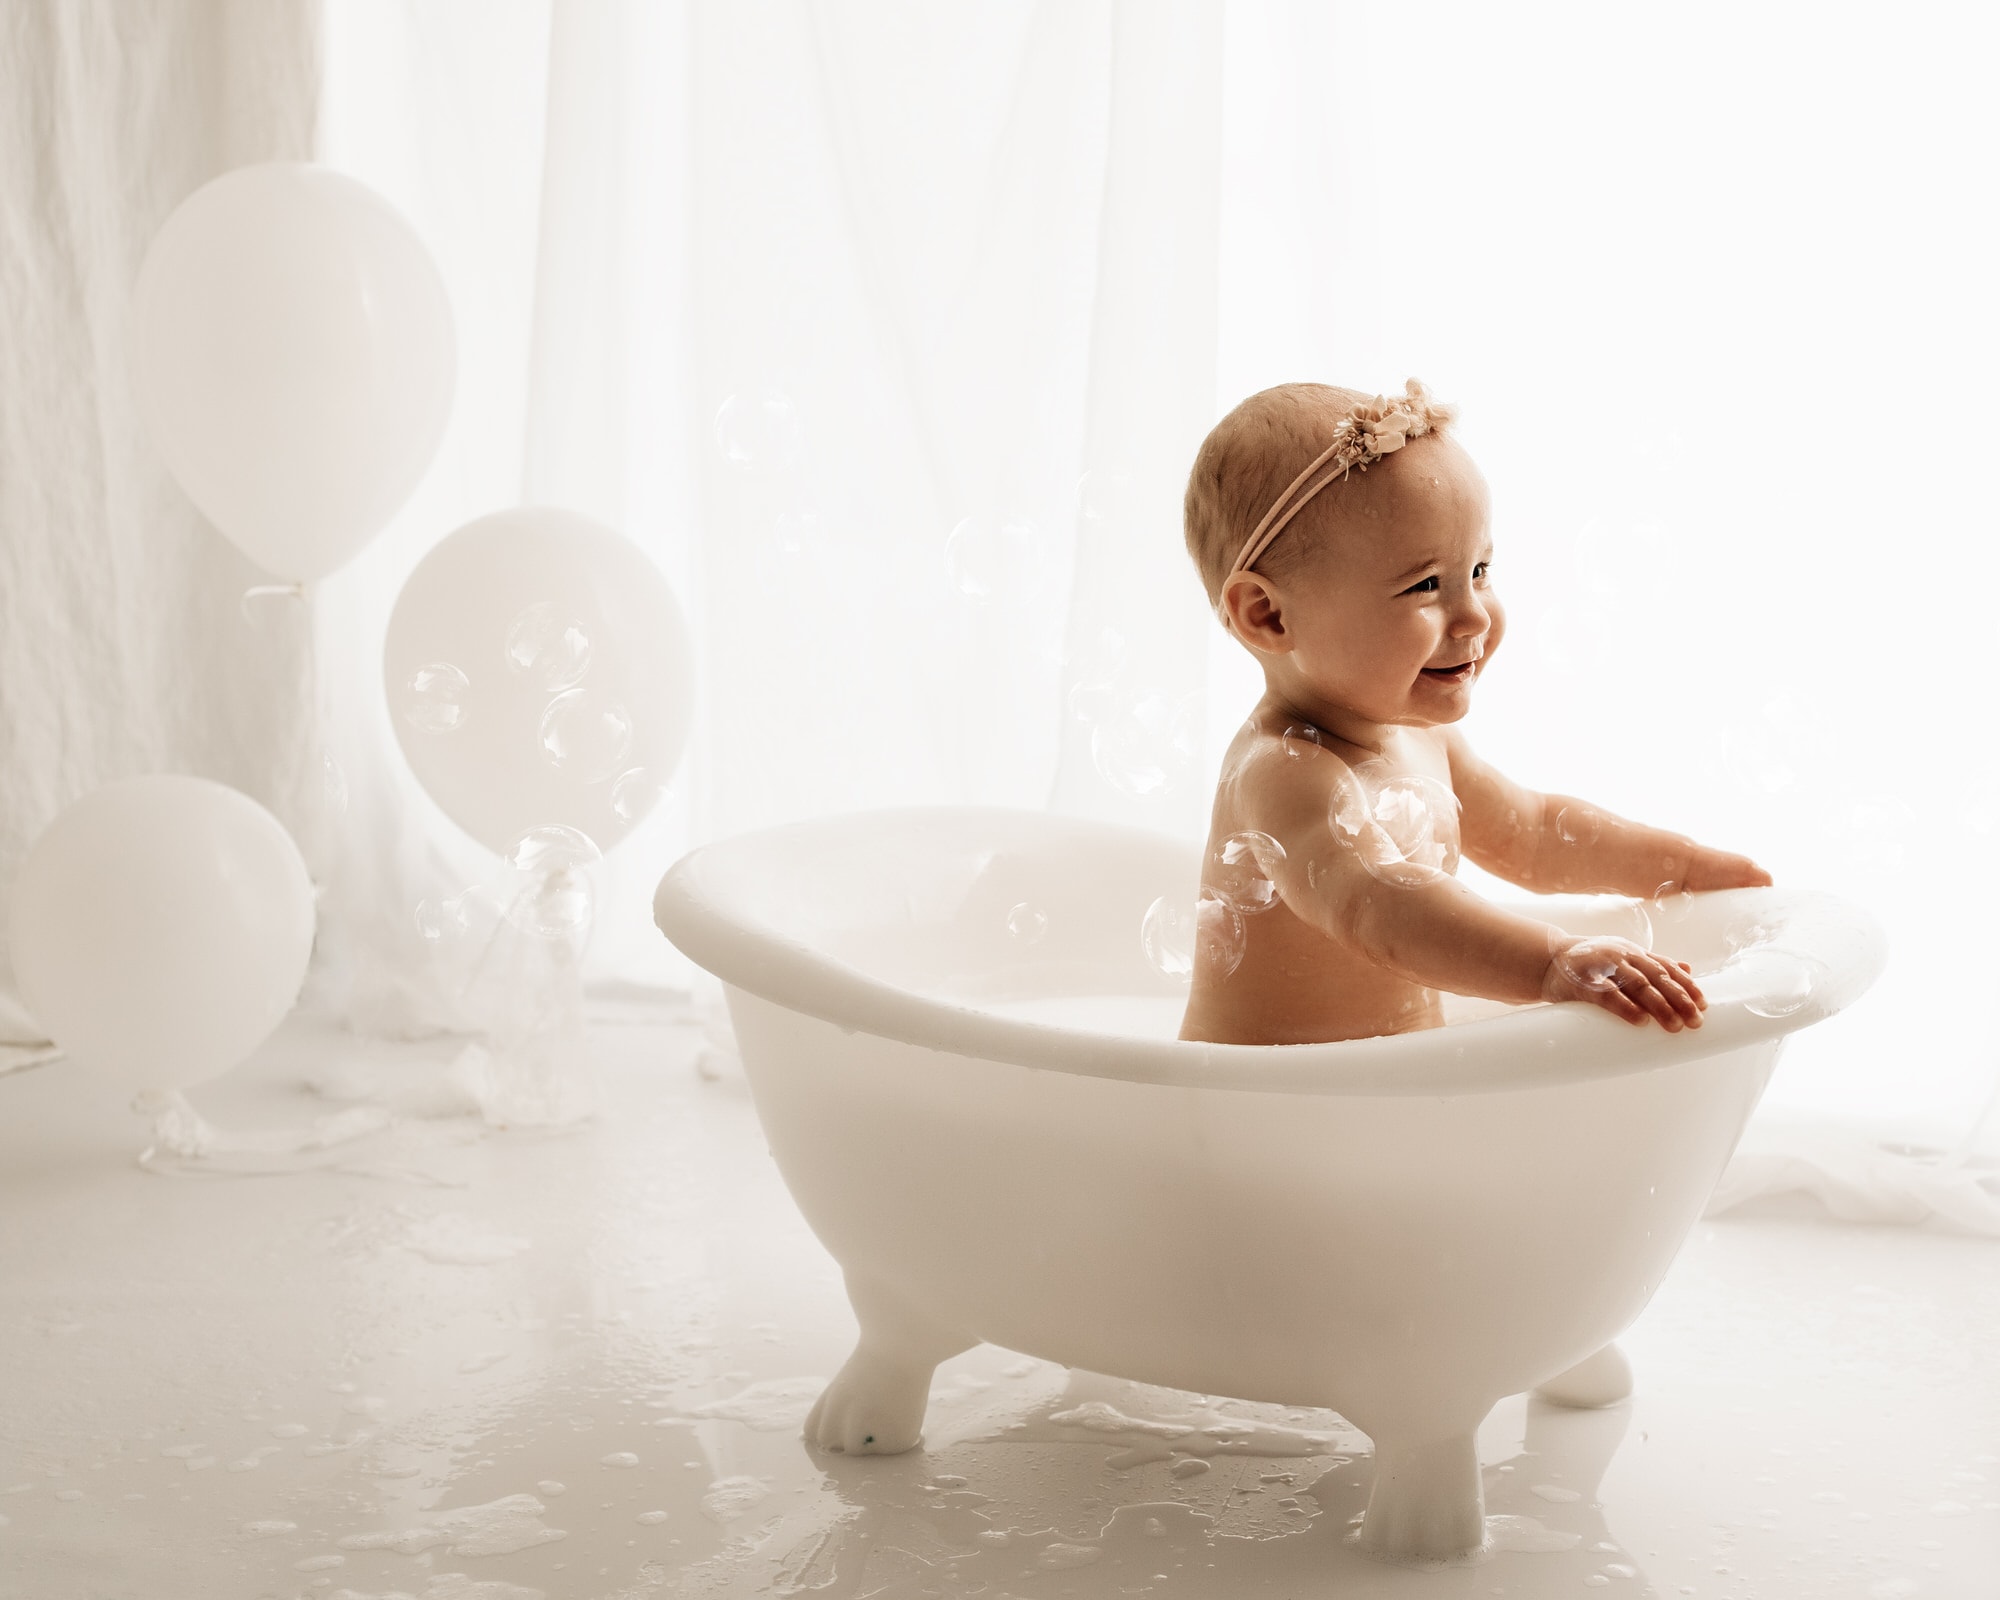 smiling baby in a bathtub with balloons during a bradford cake smash photographer photoshoot